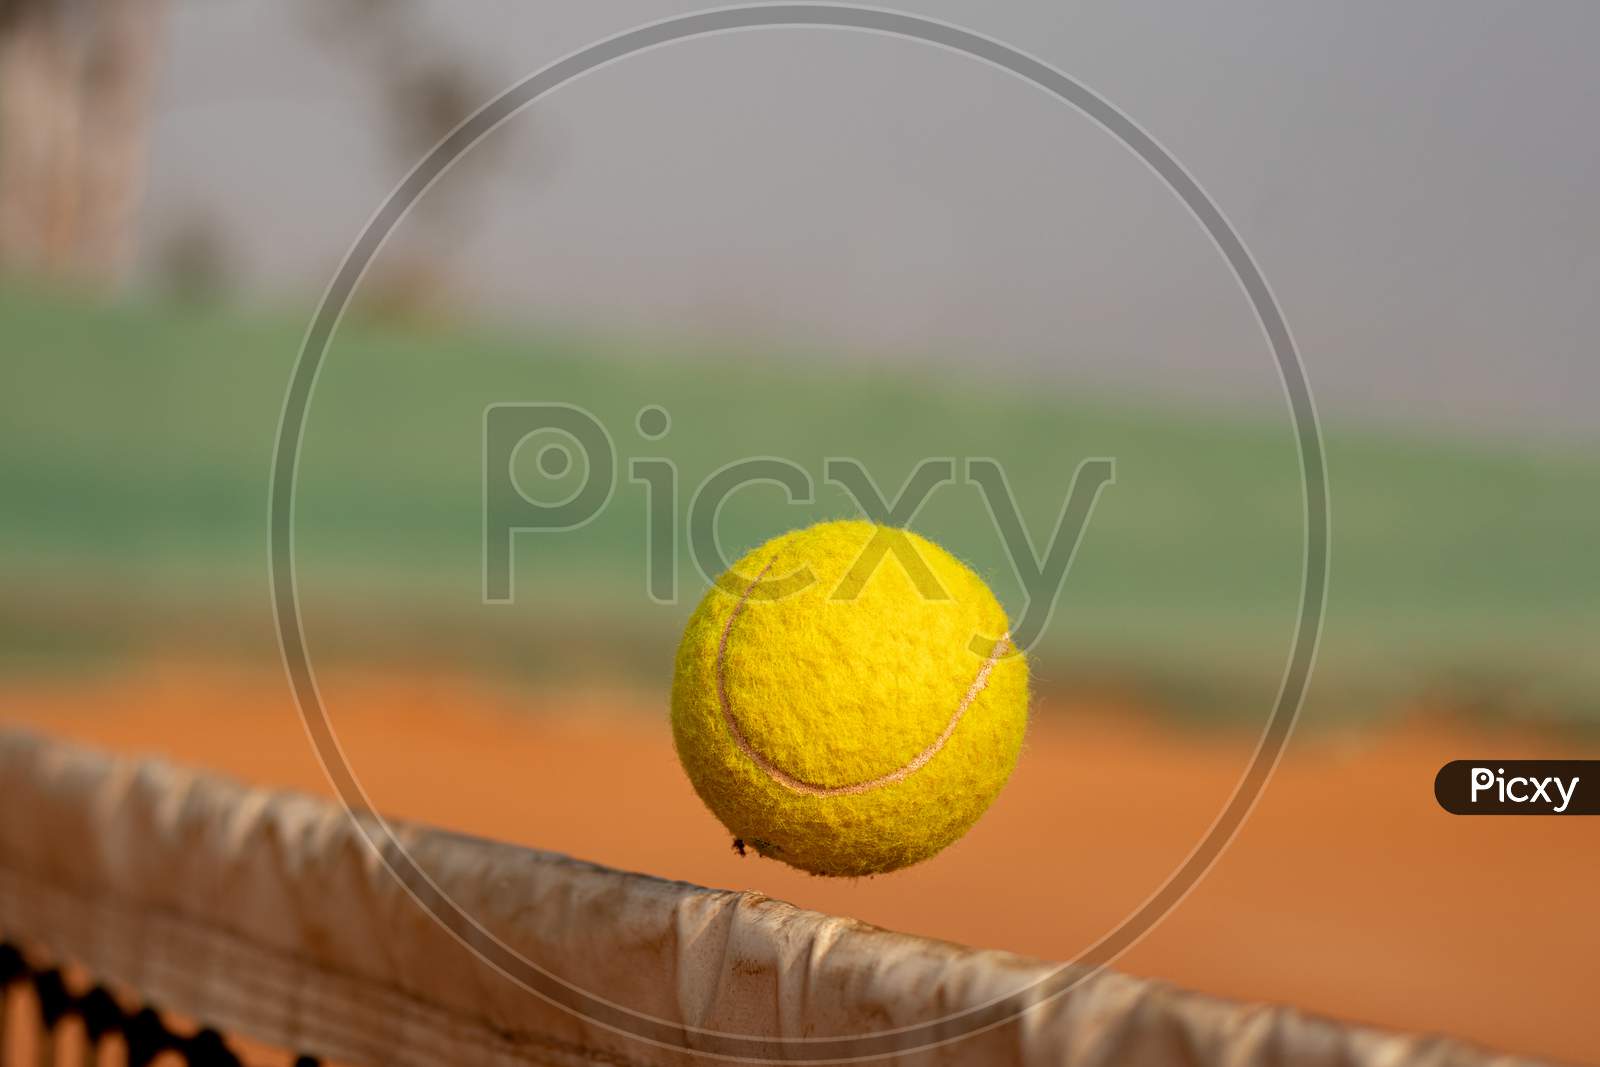 Close up shot of a Tennis Ball passing the Net in a Tennis Court